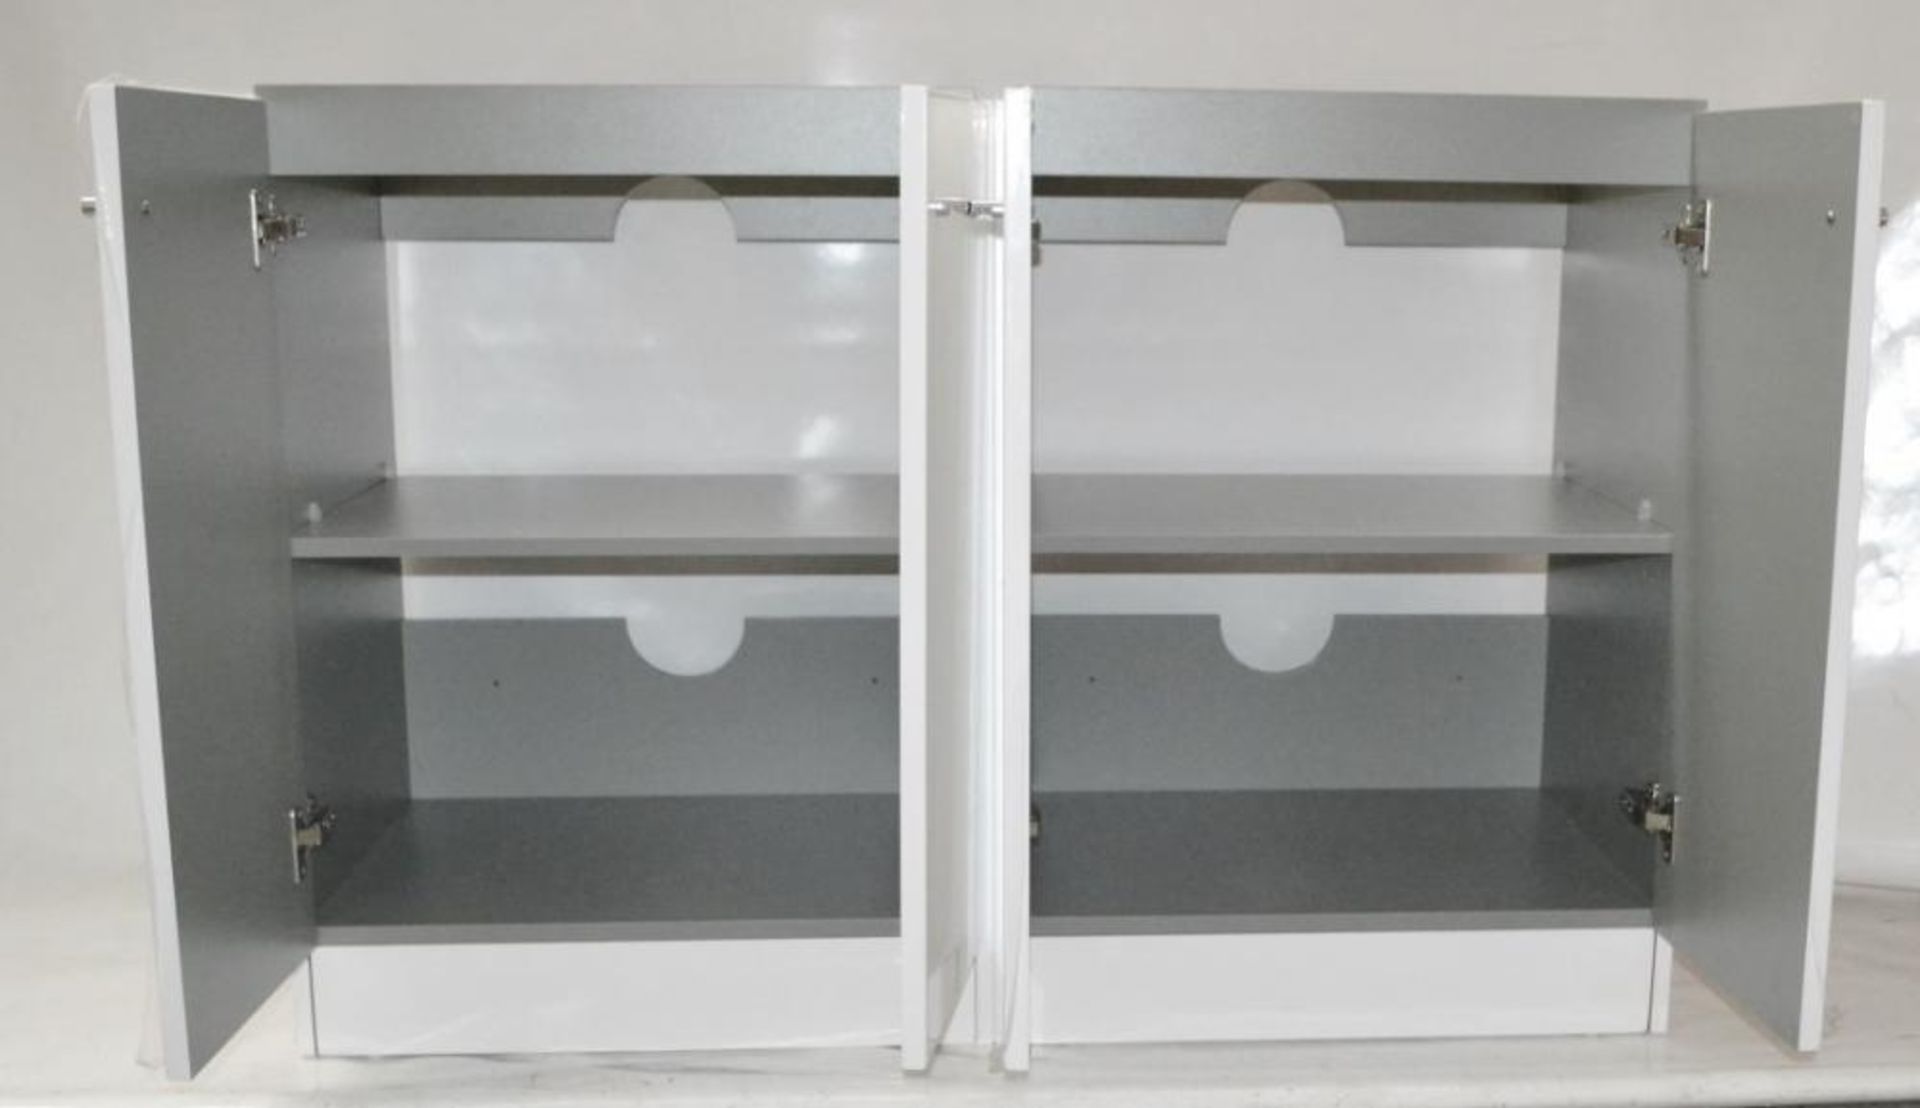 1 x Gloss White 1200mm 4-Door Double Basin Freestanding Bathroom Cabinet - New & Boxed Stock - CL307 - Image 2 of 7